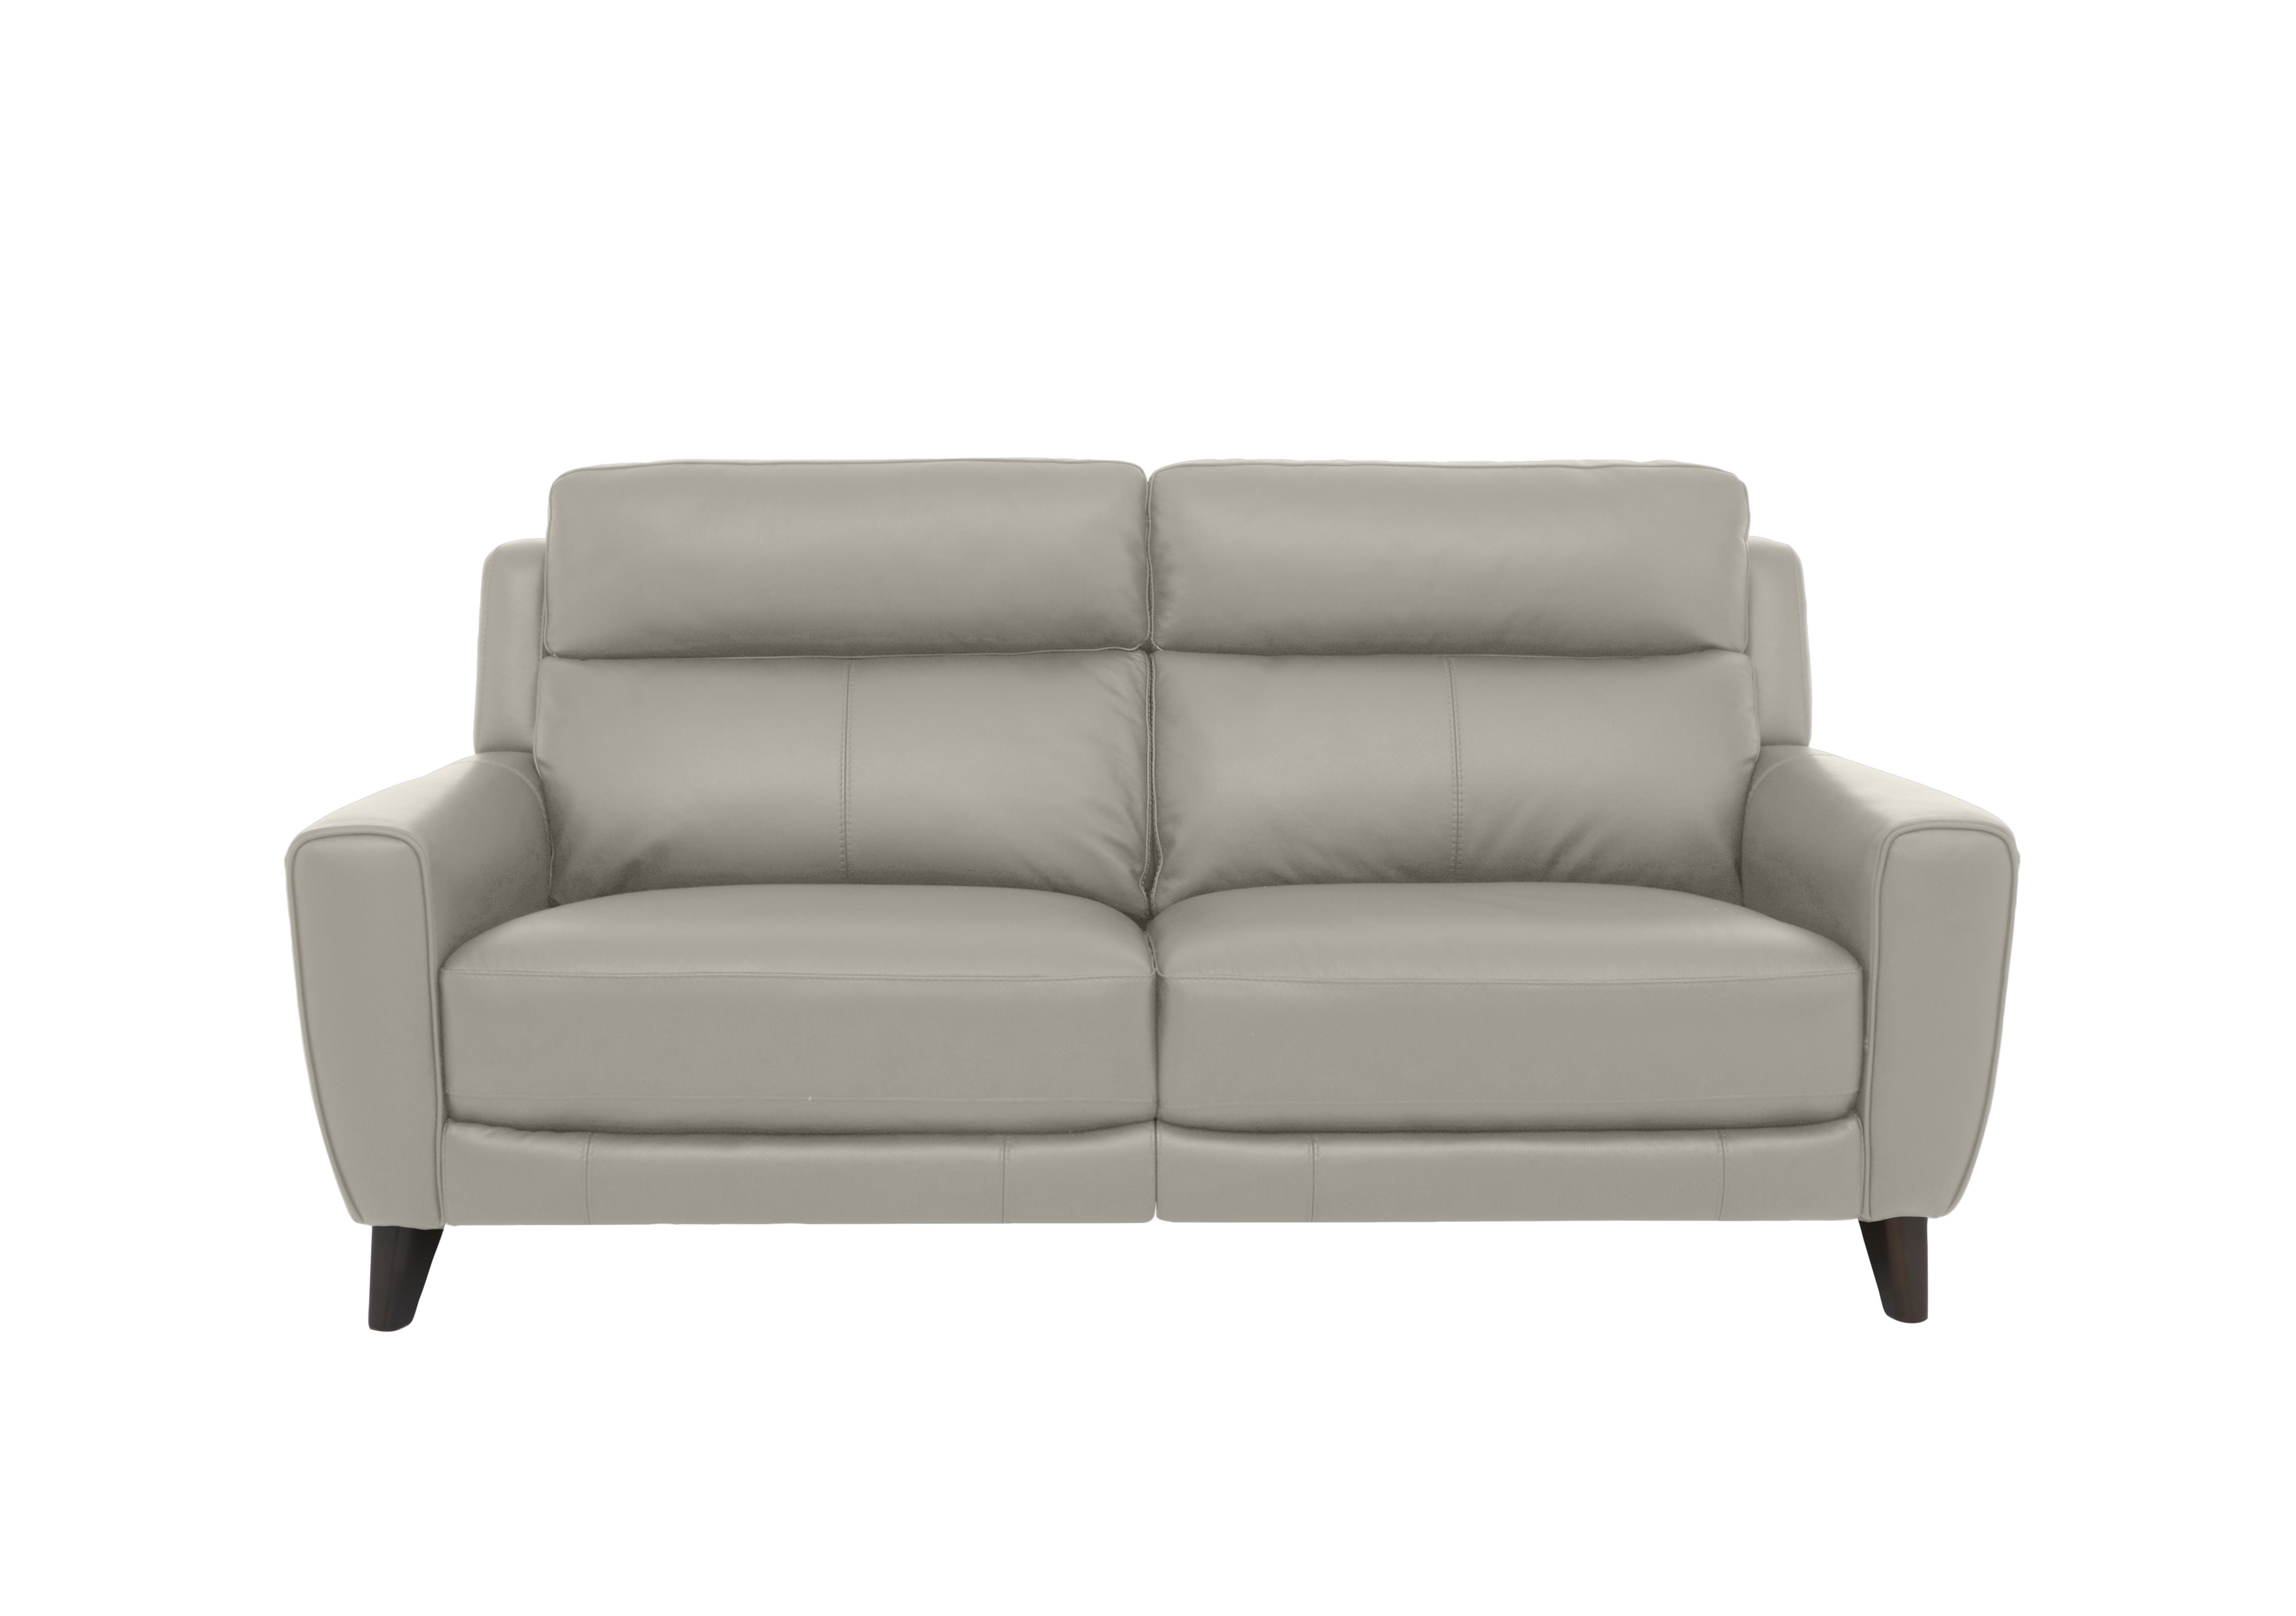 Zen 3 Seater Leather Sofa in Bx-251e Grey on Furniture Village